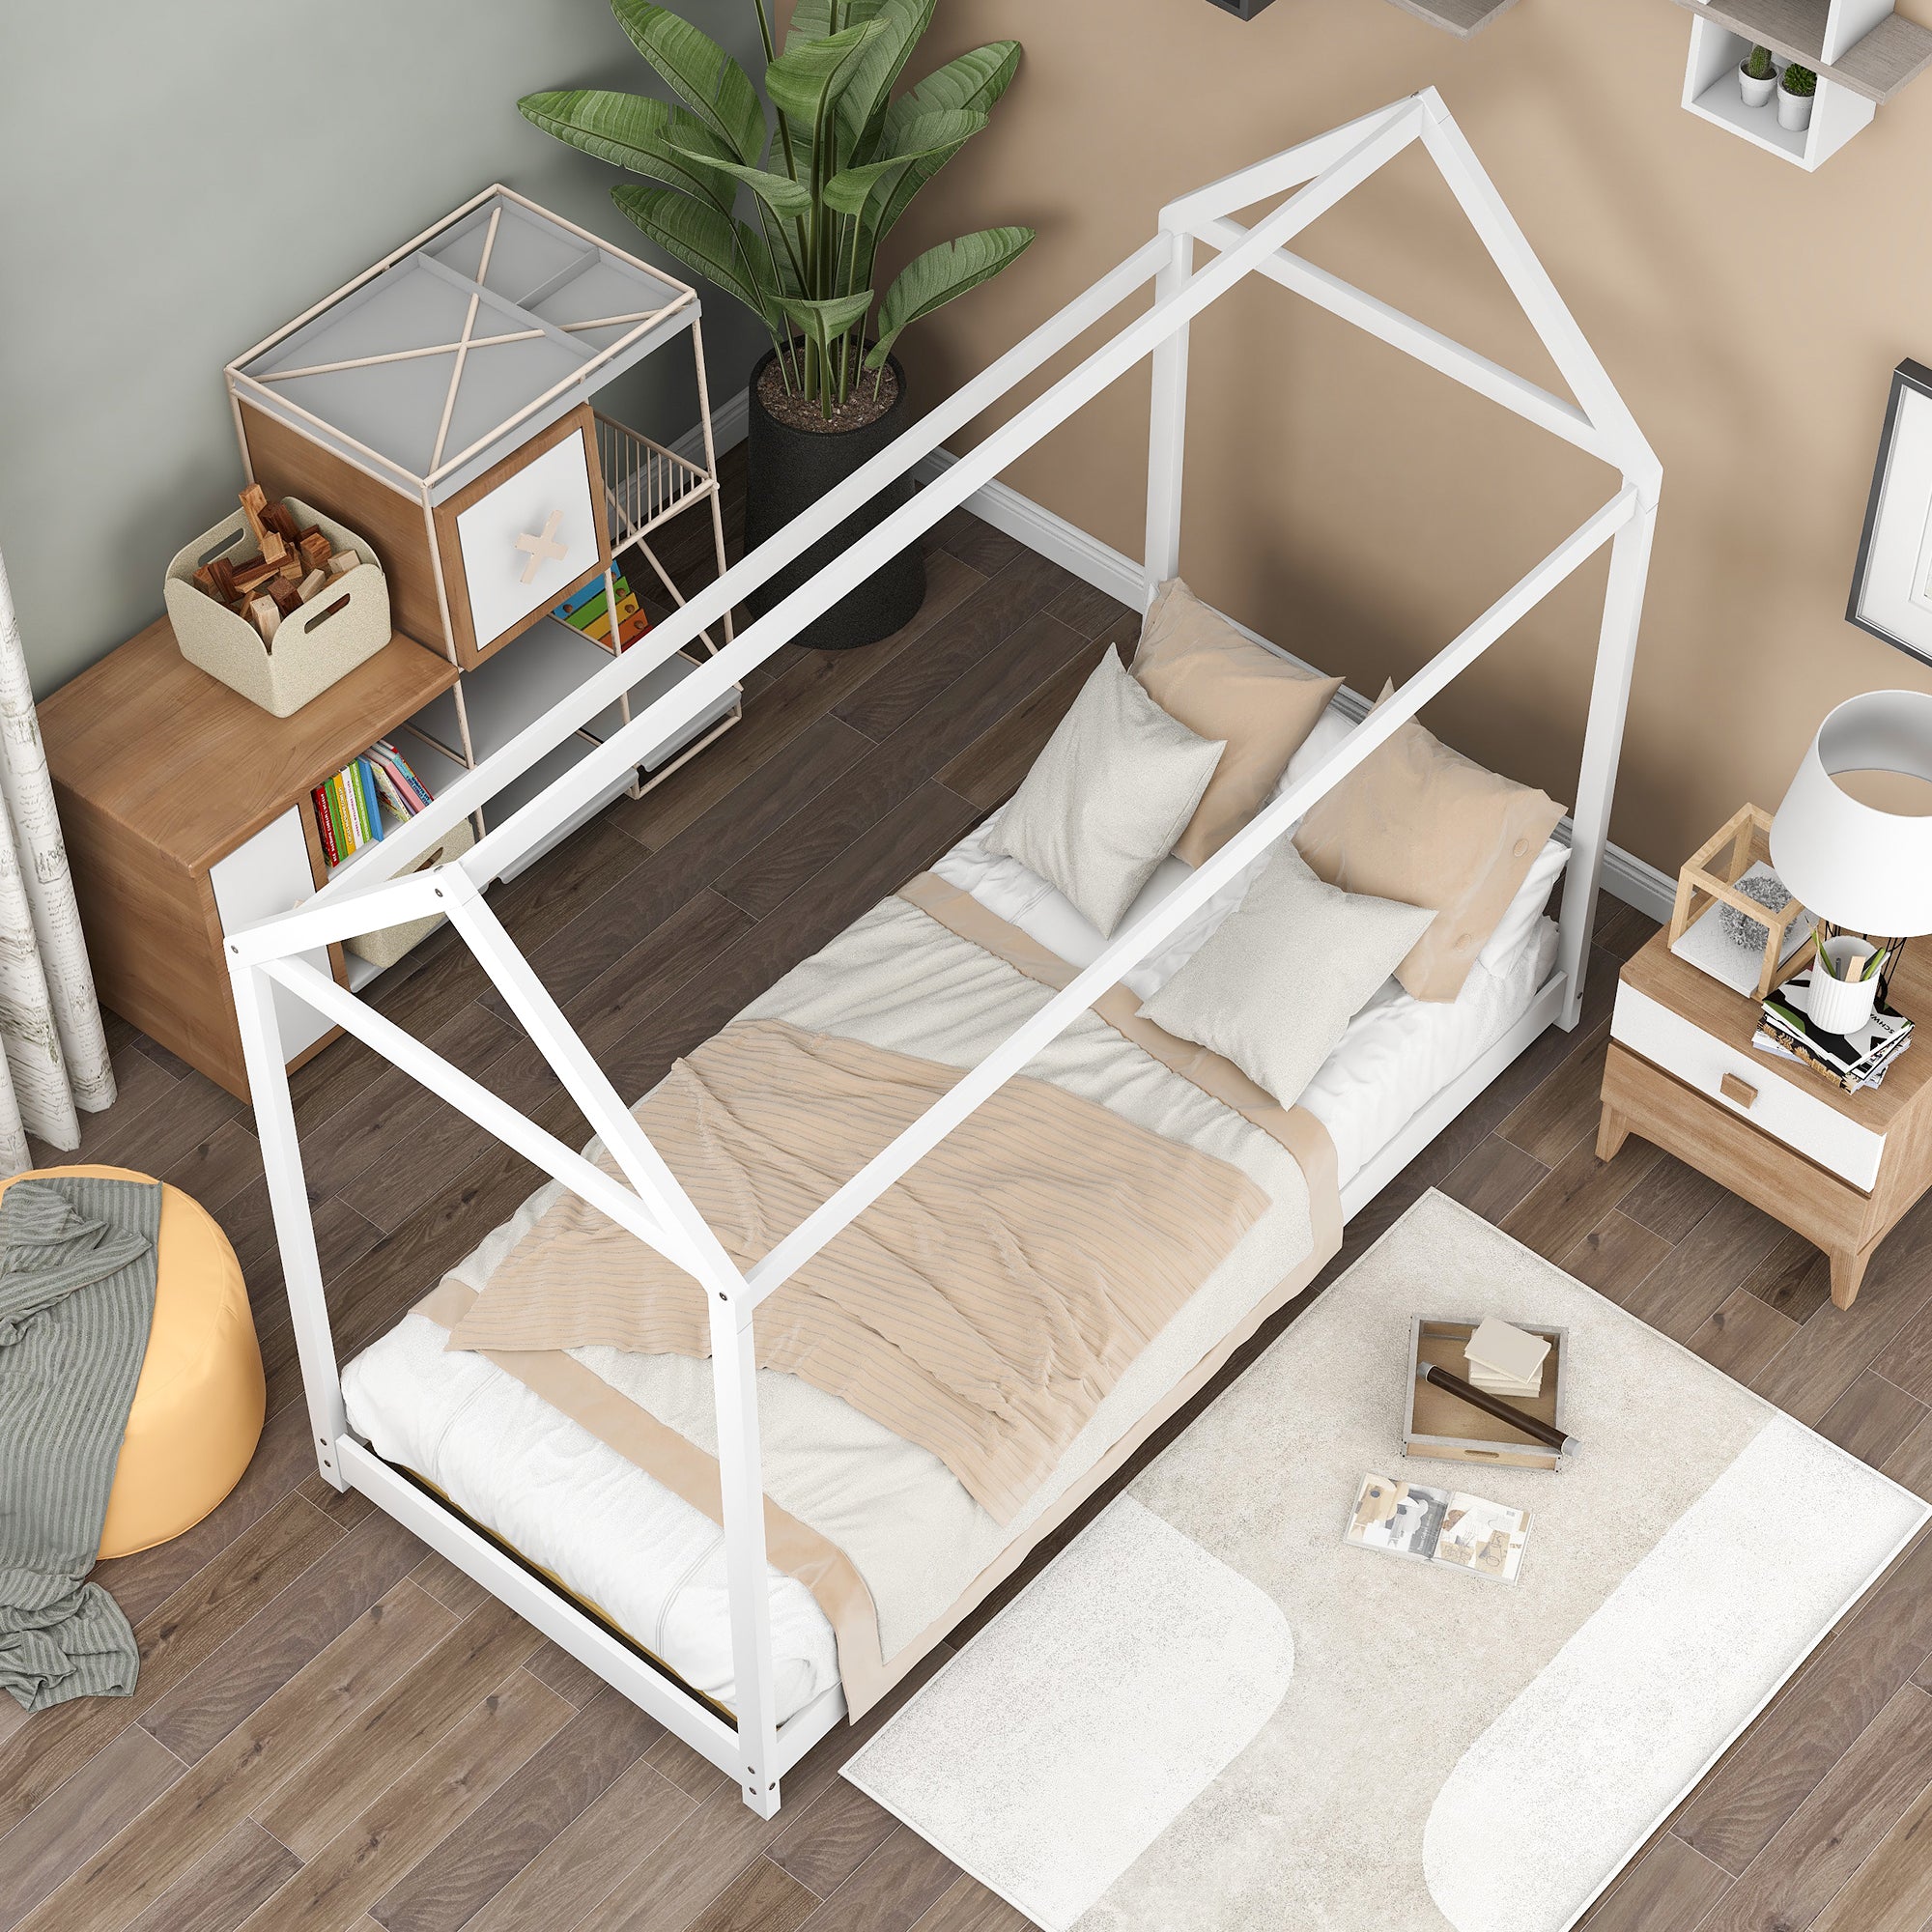 Twin Size Wooden House Bed, White